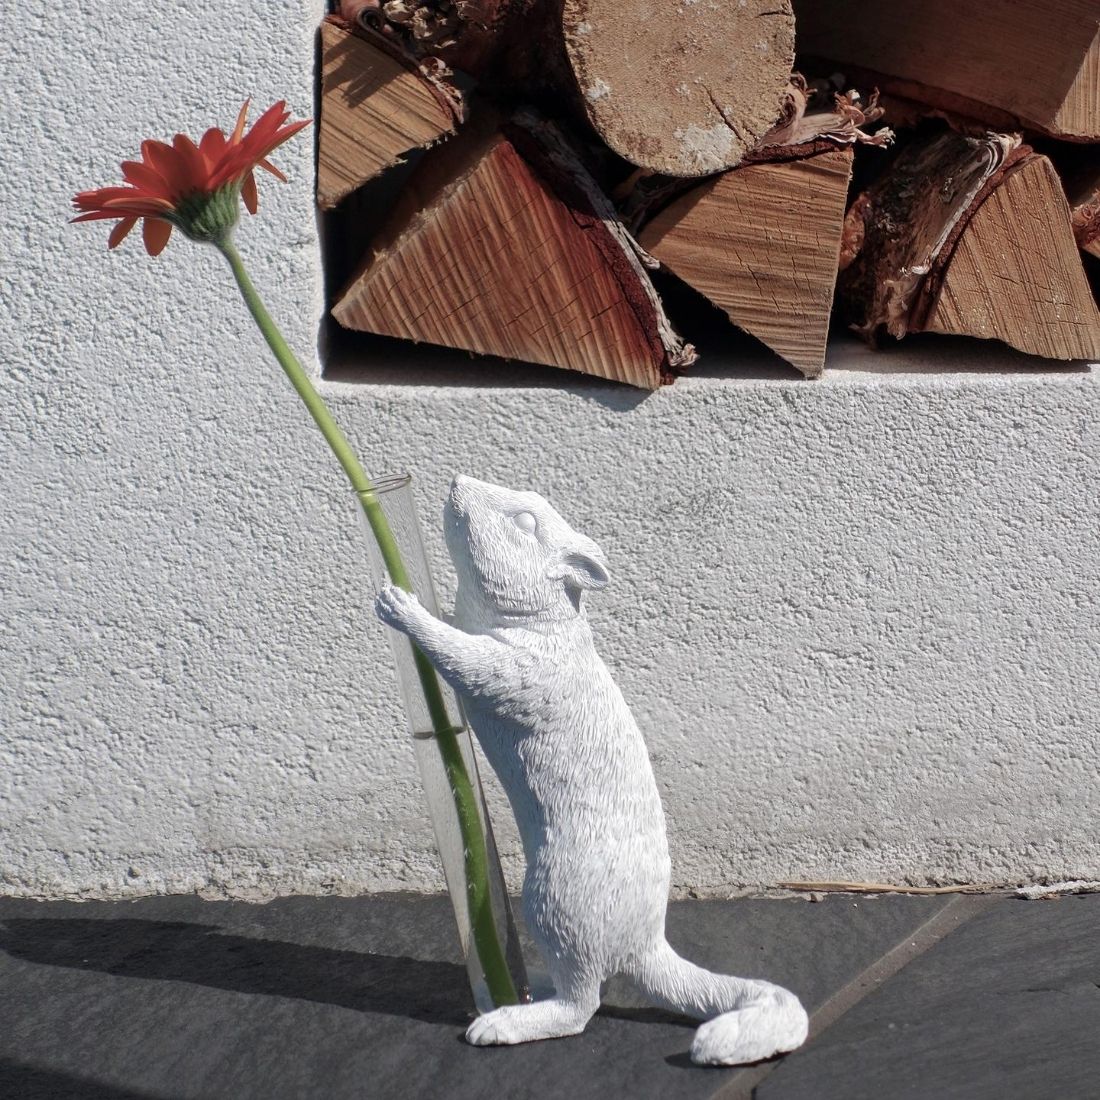 Squirrel Stem Vase for Single Flower with Decorative Statue